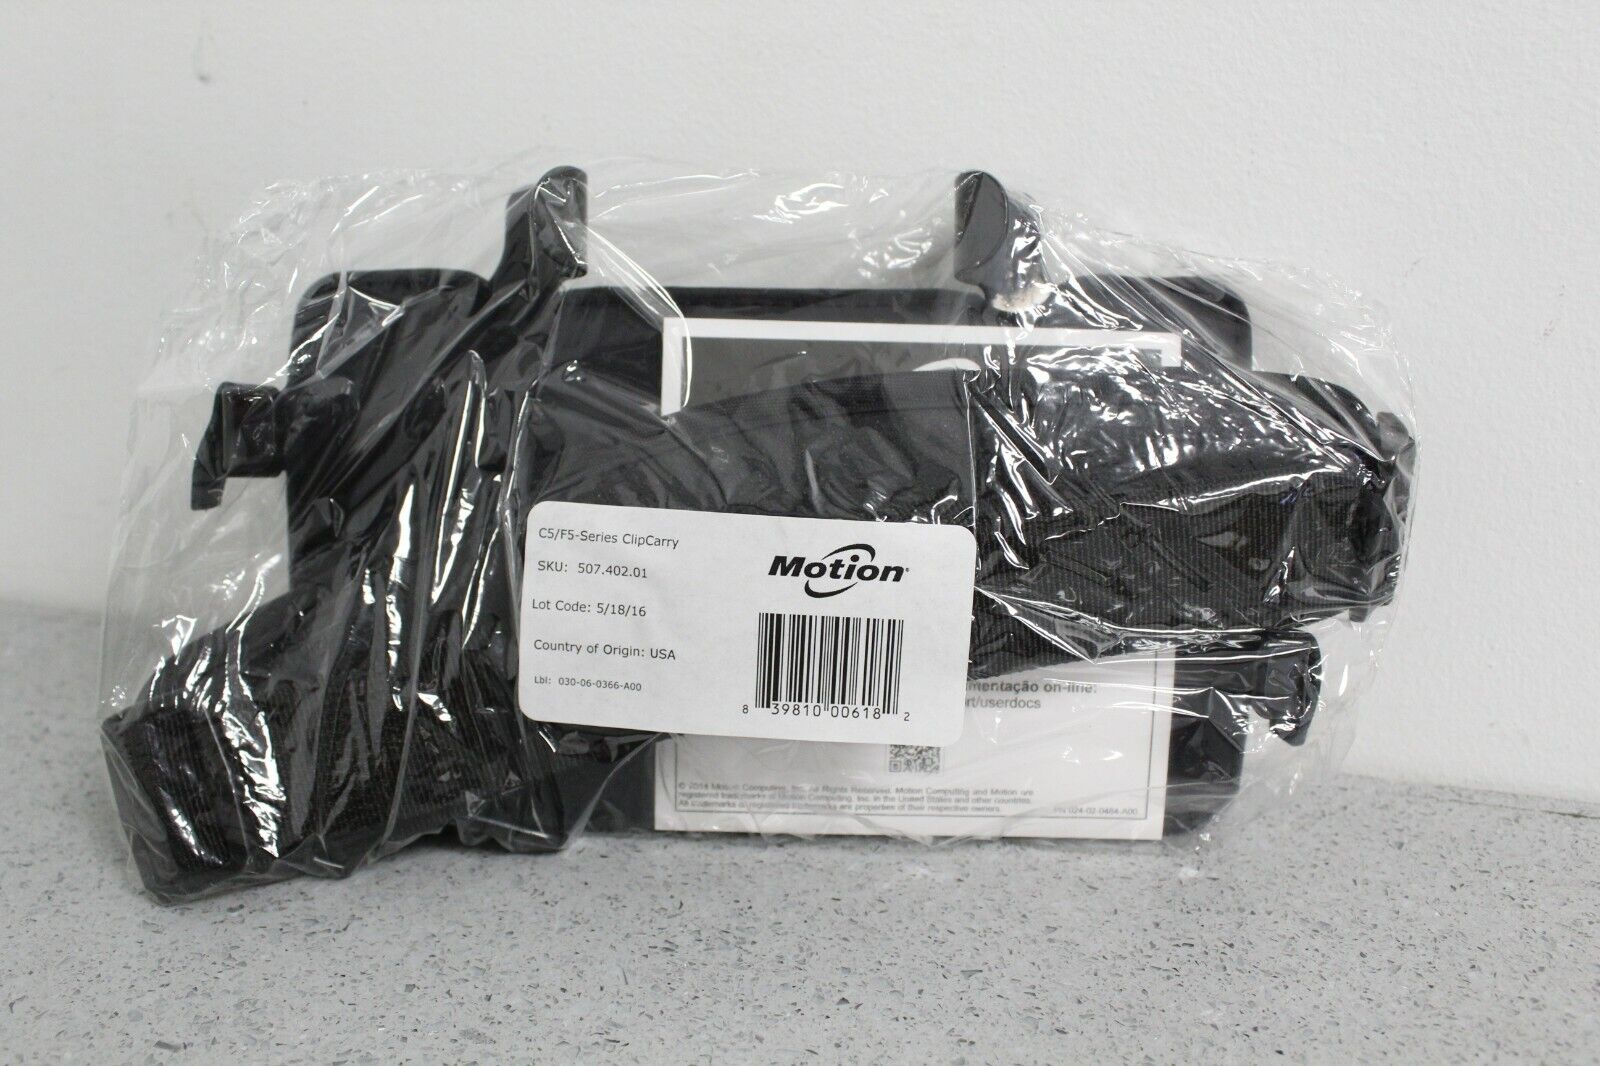 BRAND NEW Motion Computing C5/F5 Series ClipCarry 507.402.01 